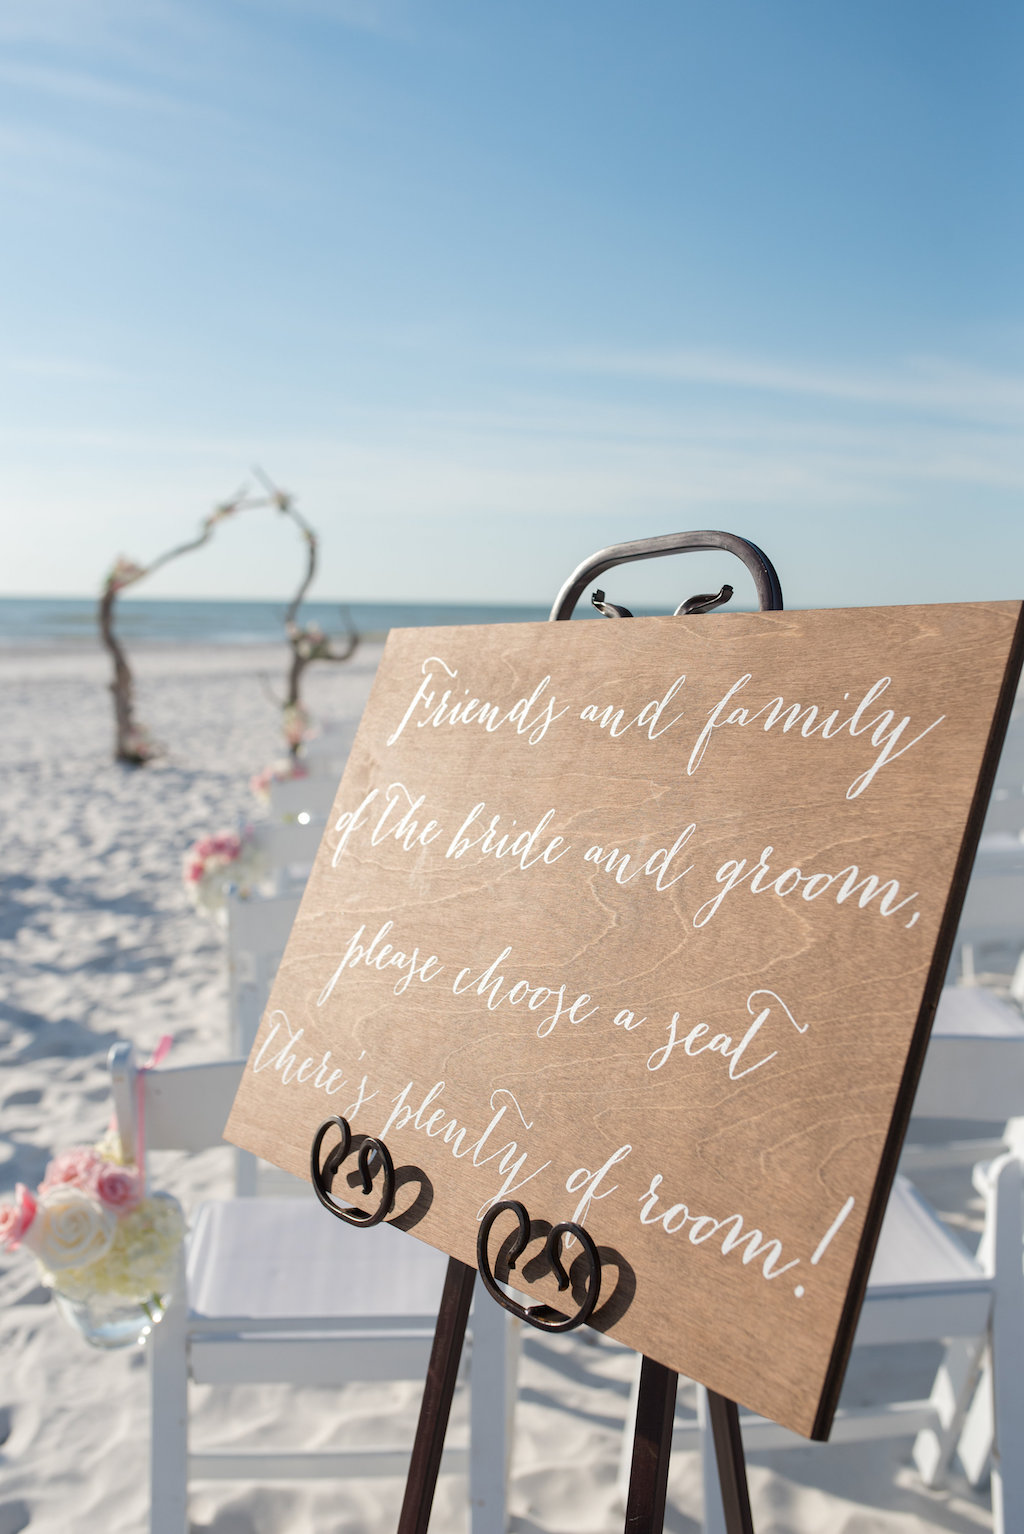 Hand-painted Wooden Welcome Sign at Beach Wedding Ceremony with Natural Driftwood Arch, Folding White Chairs with White and Pink Flowers | St Petersburg Wedding Venue The Don Cesar